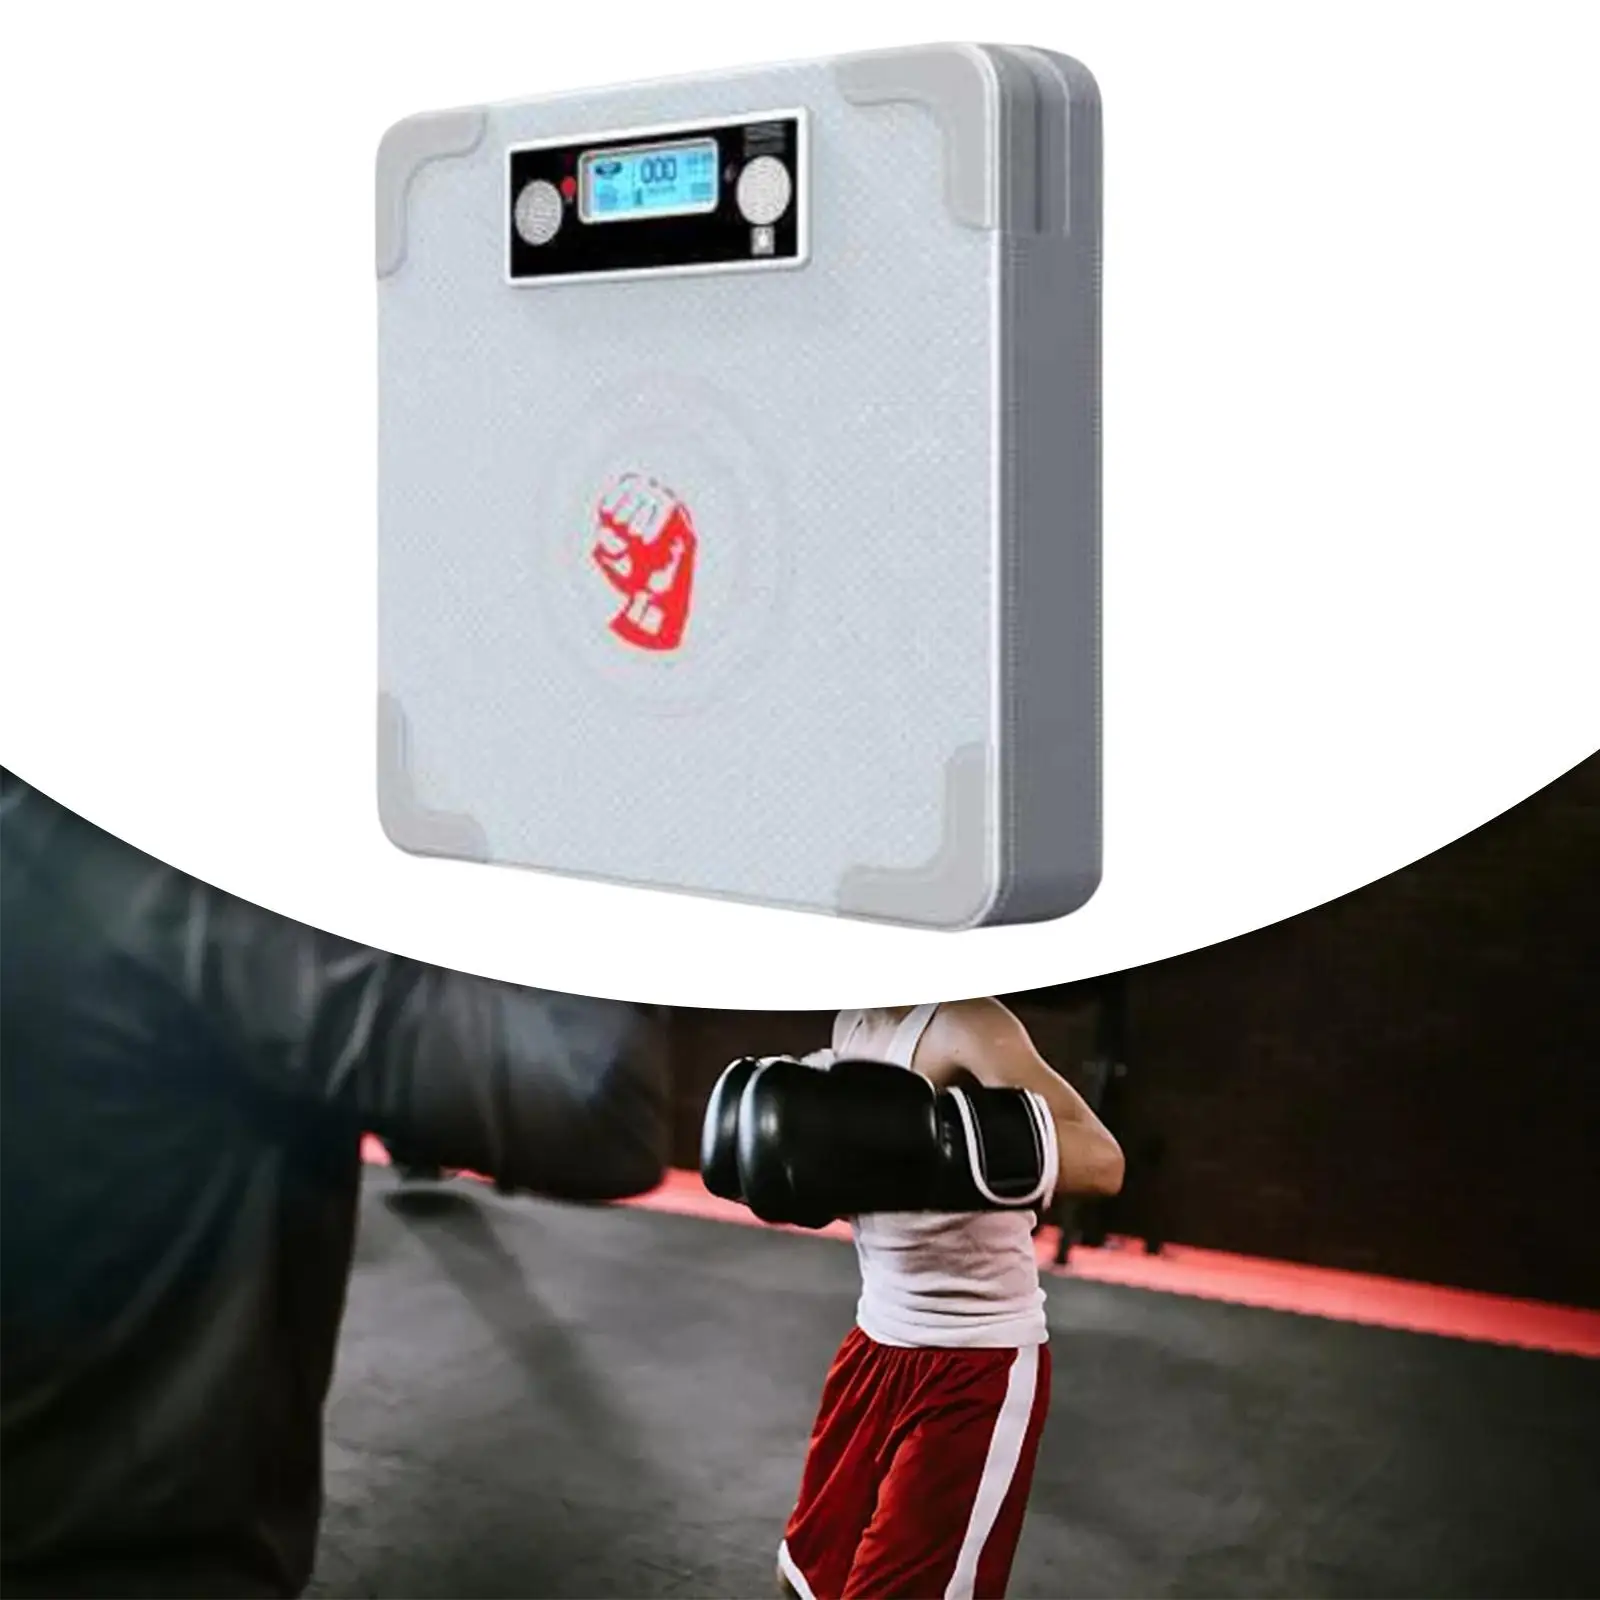 Boxing Sandbag Force Tester Boxing Equipment Wall Mounted for Workouts